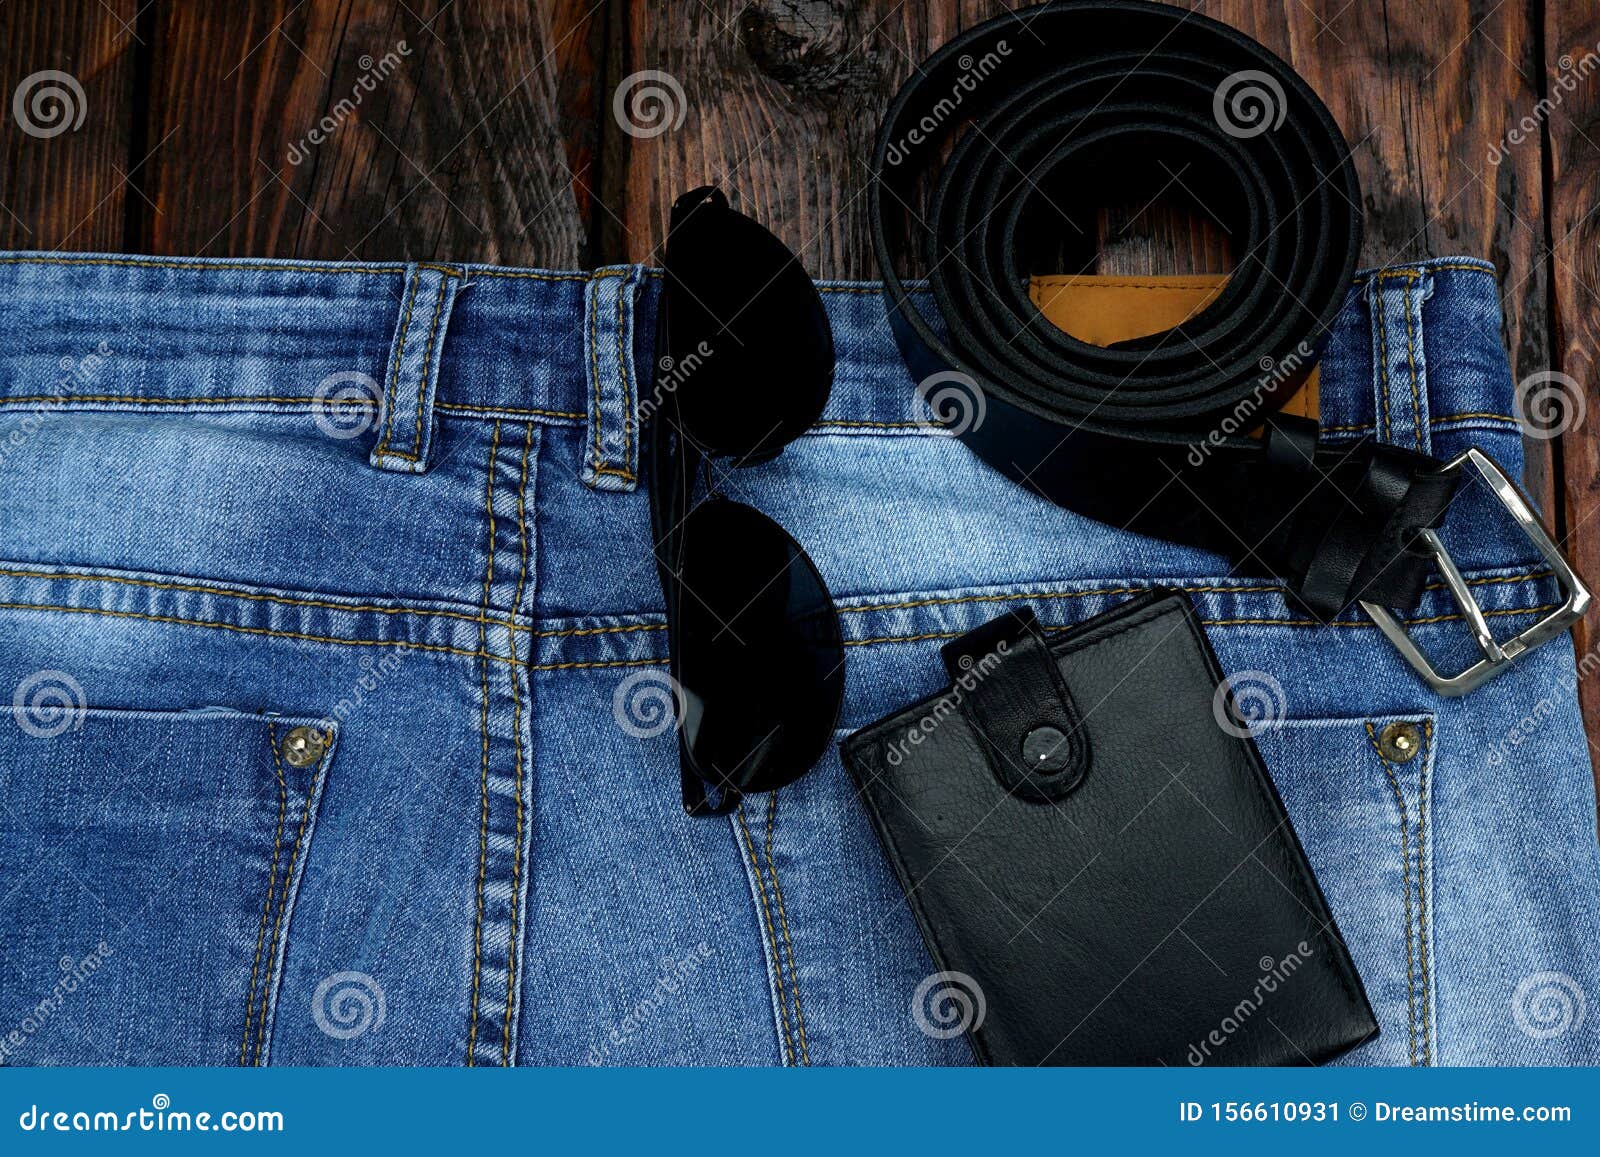 Blue Jeans on a Rough, Wooden Table. Stock Image - Image of view ...